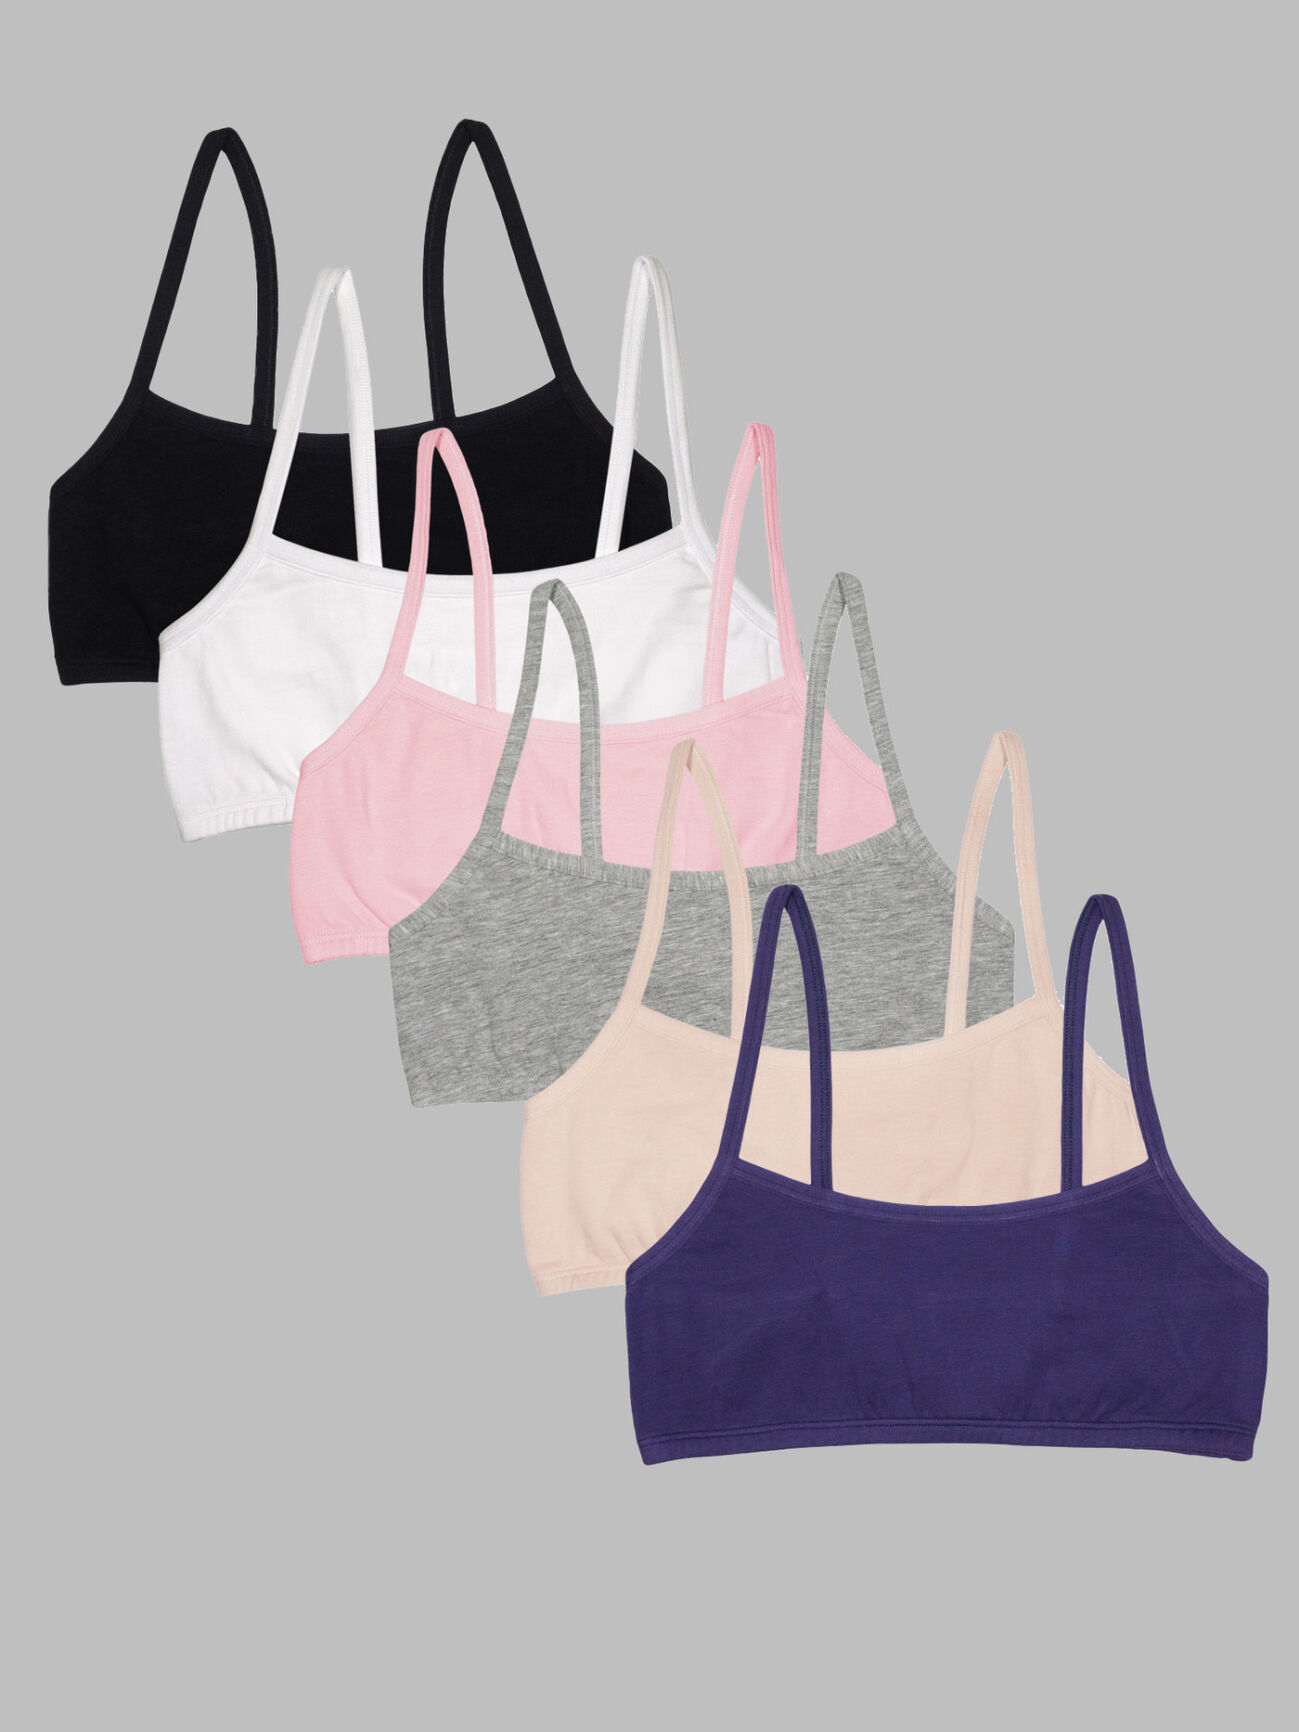 50% off Clear!Sports Bras for Women Casual and Comfortable Stretch